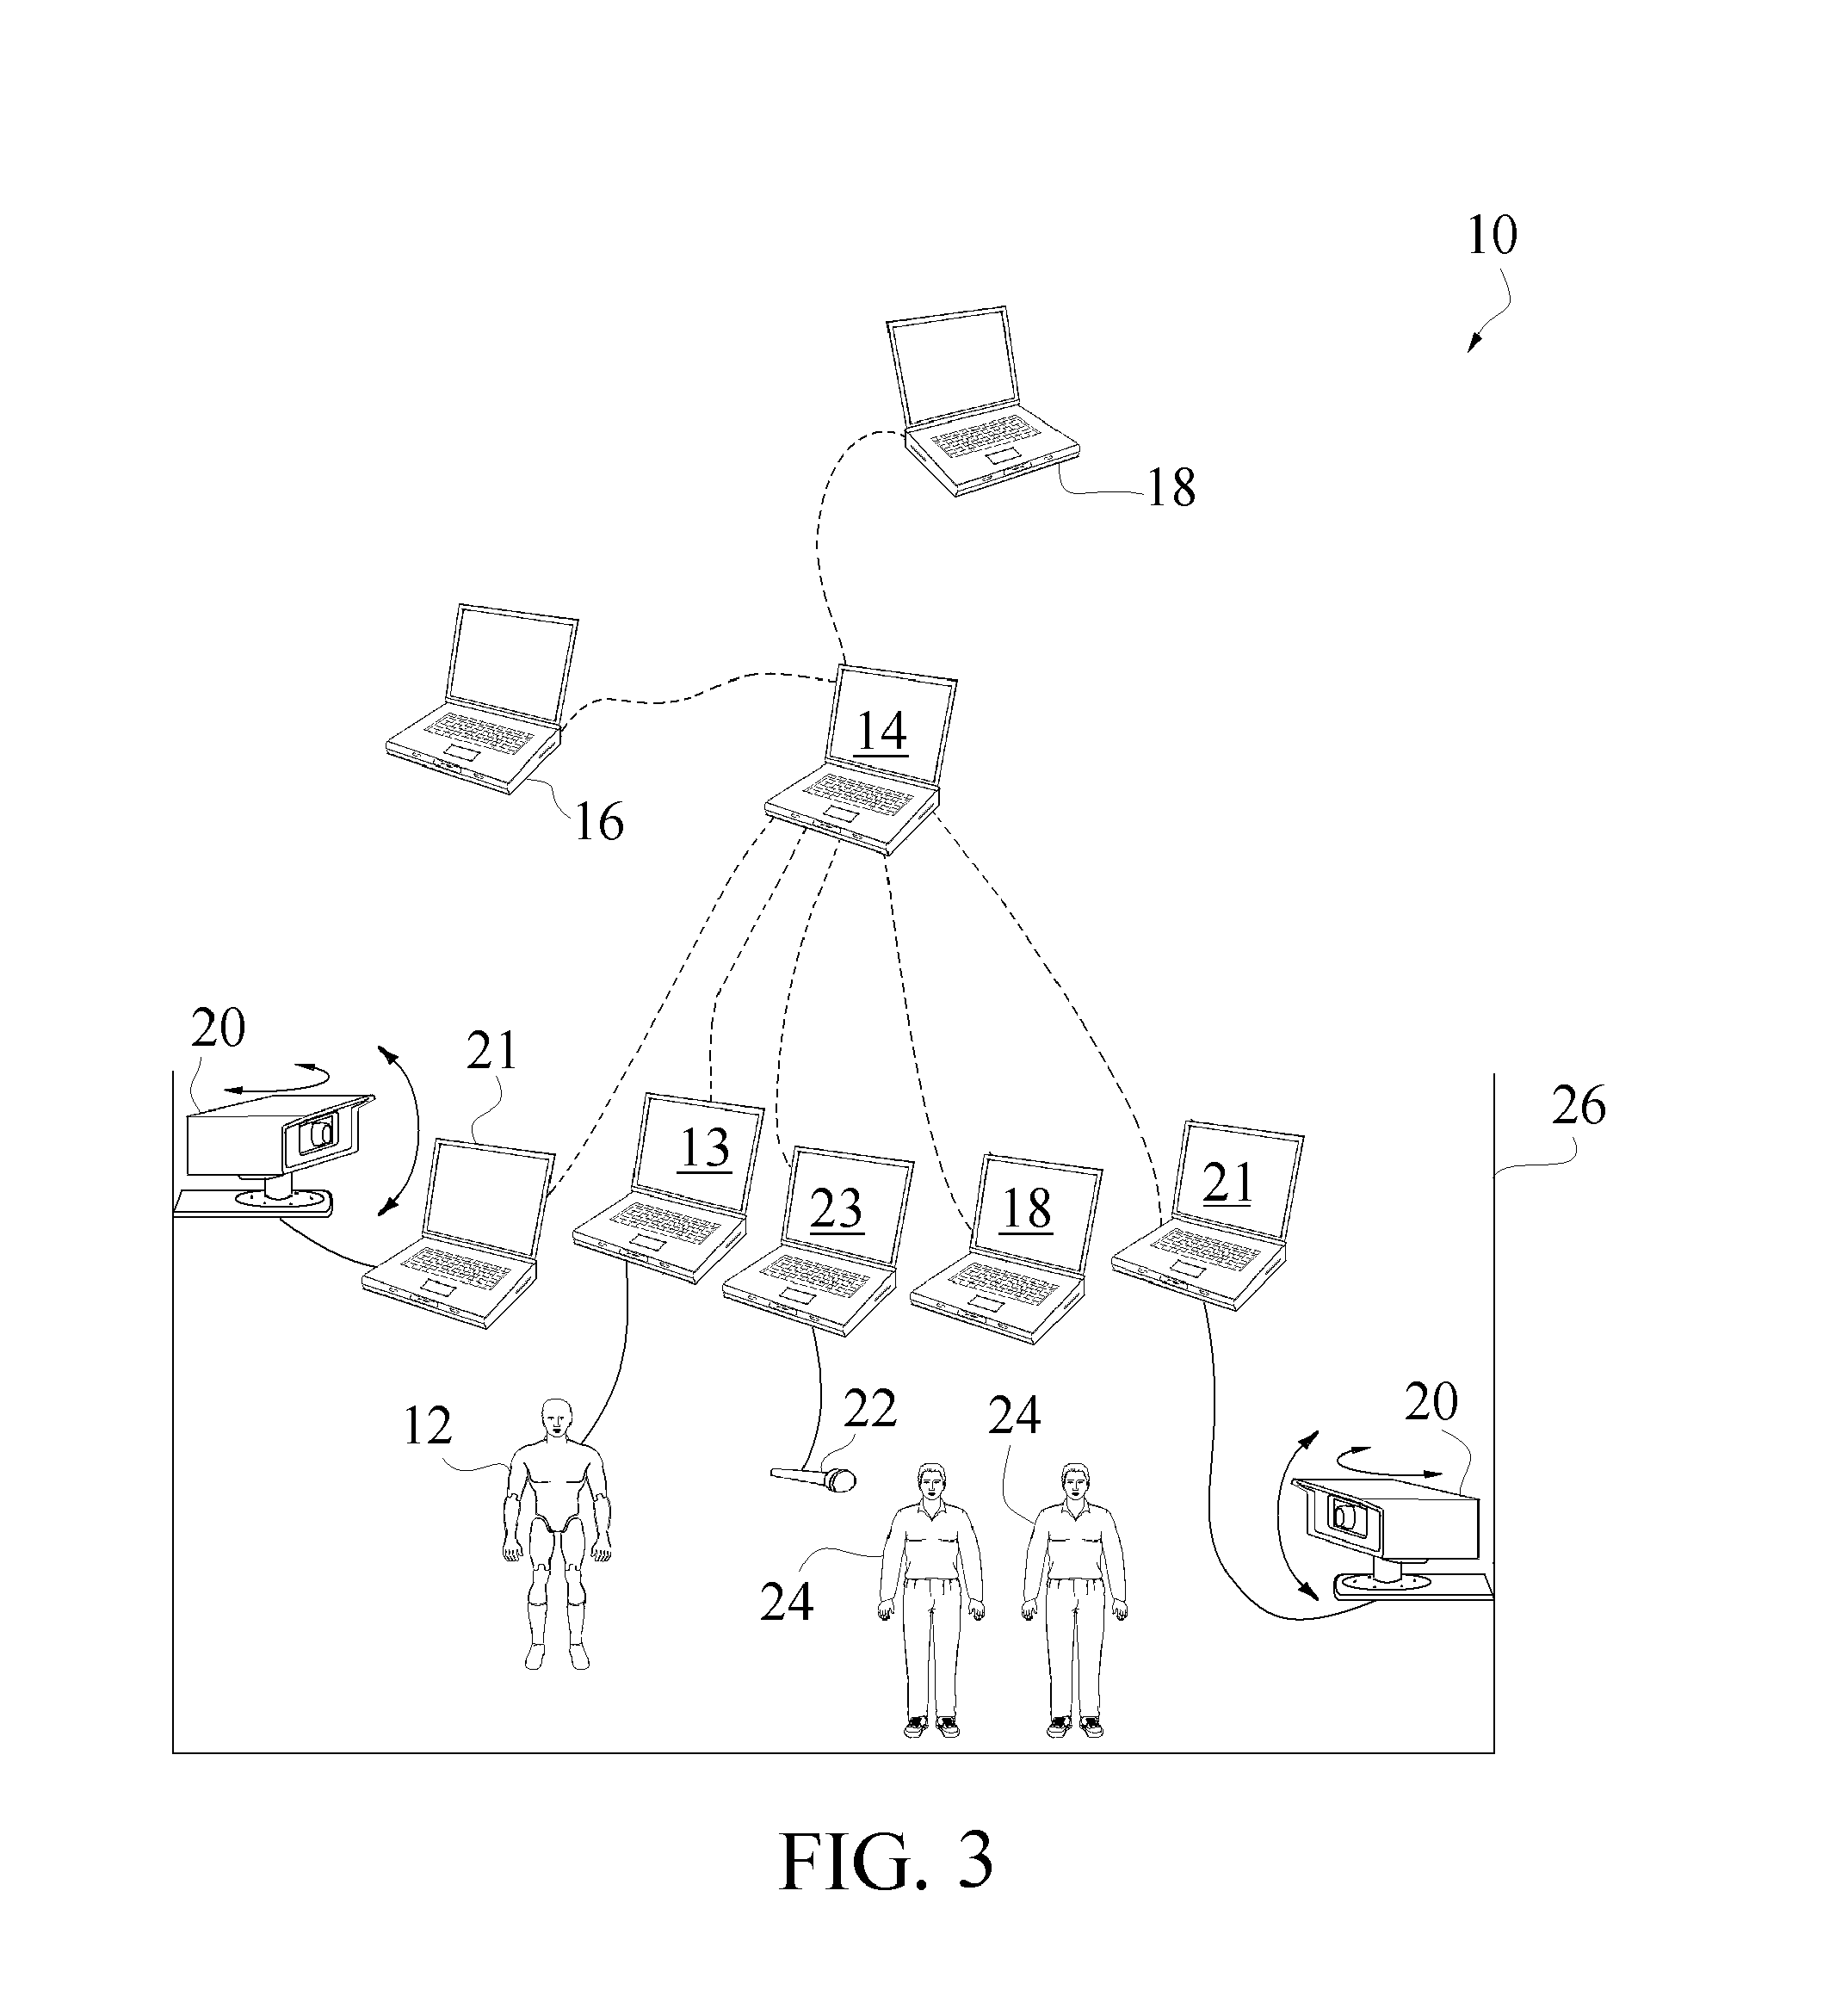 Method and apparatus for integrated recording and playback of video audio and data inputs